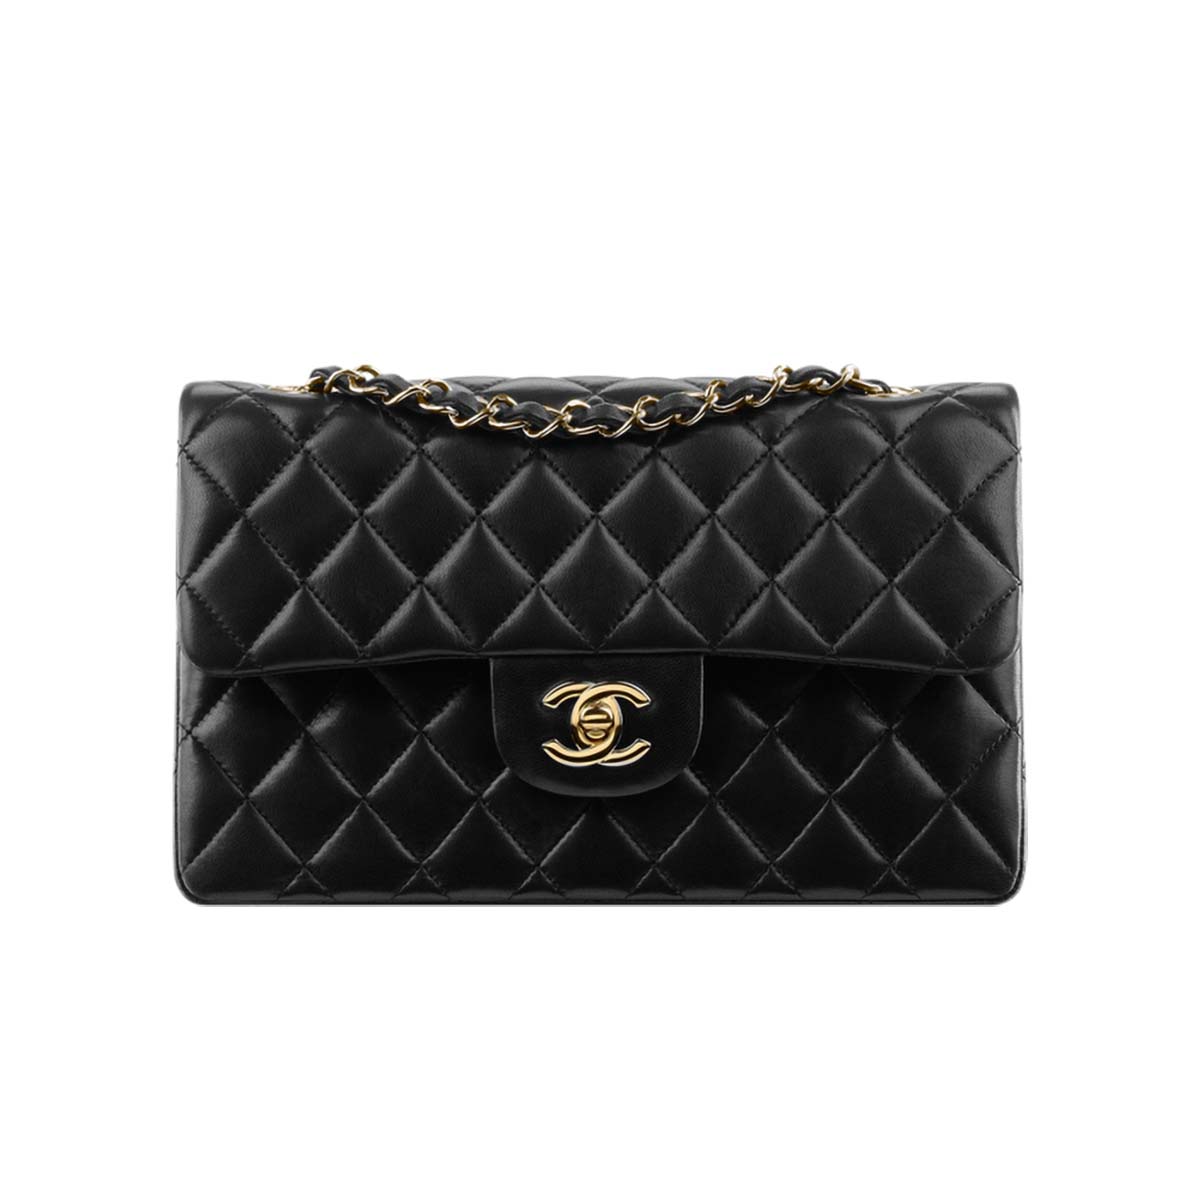 Chanel Small Classic Iconic Handbag in Lambskin with Gold-tone Metal ...